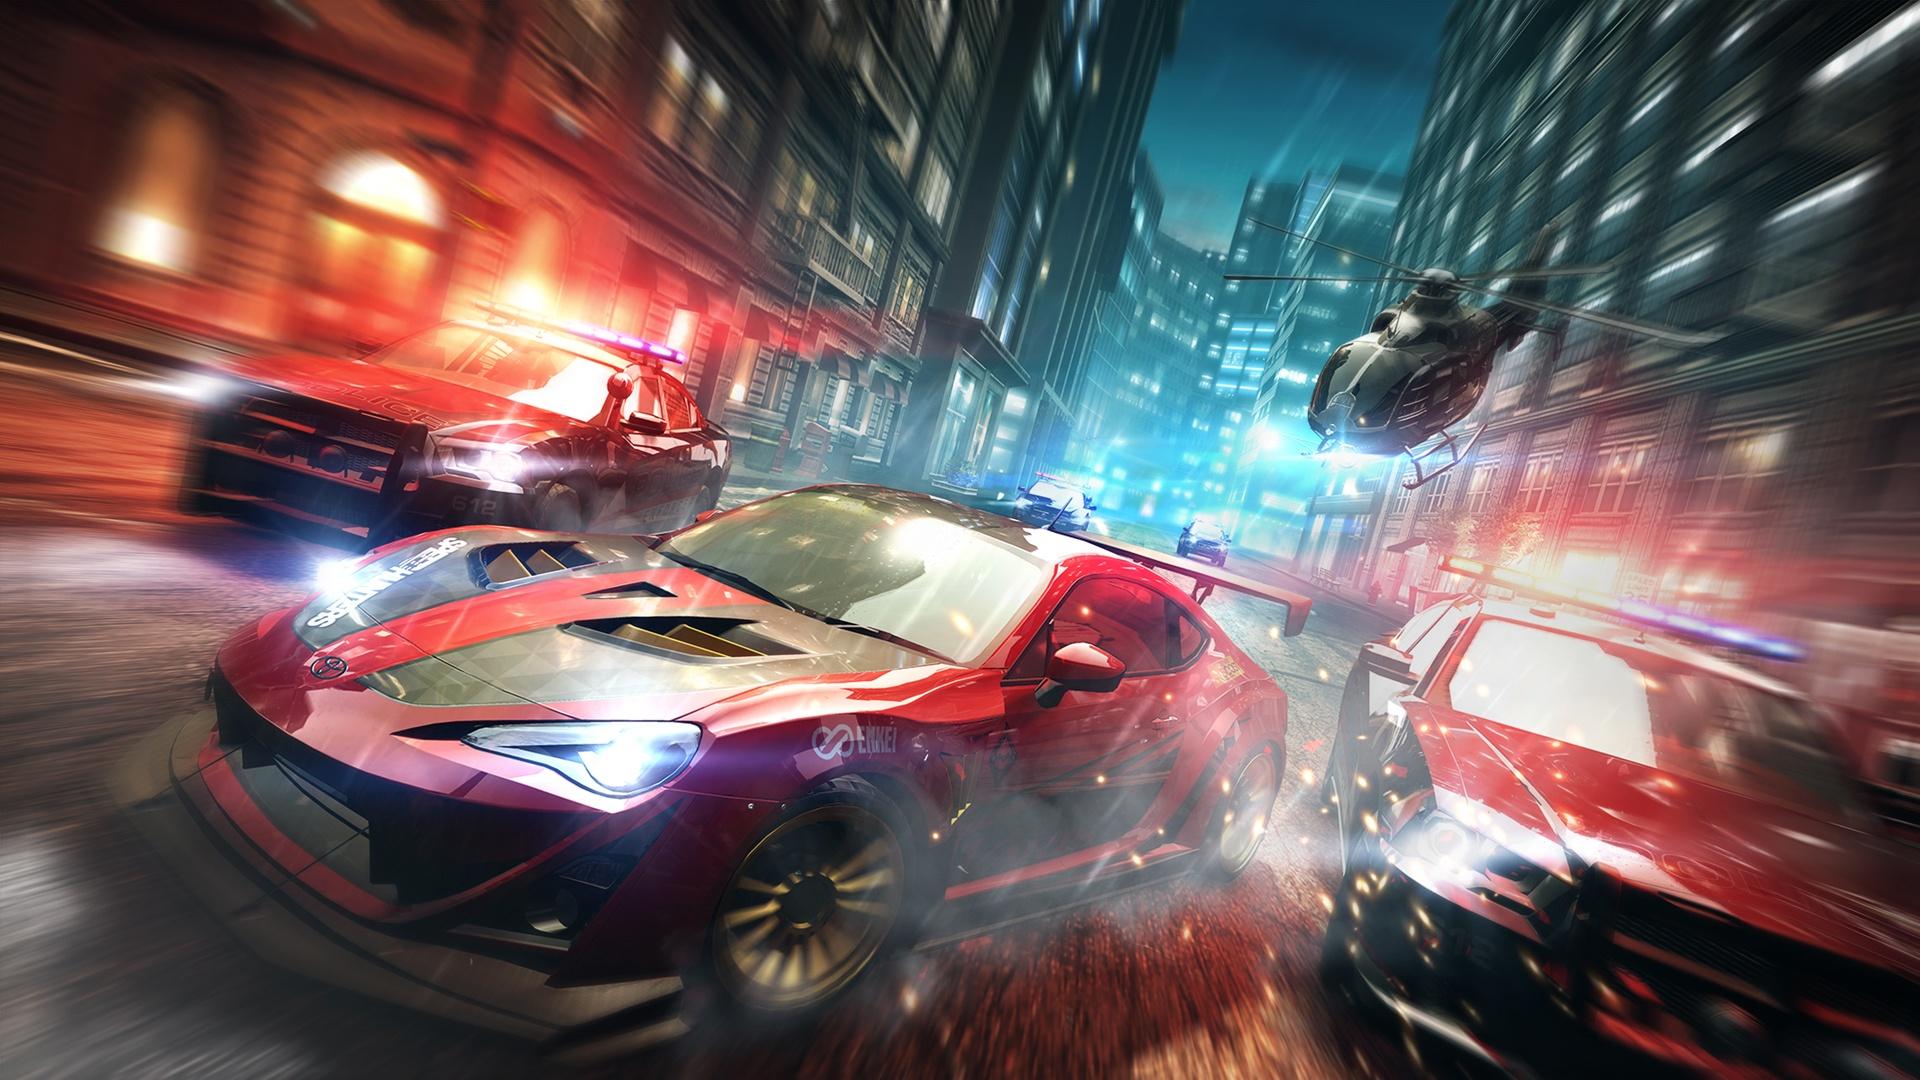 Best Need For Speed HD Wallpaper Download with 4k resolution